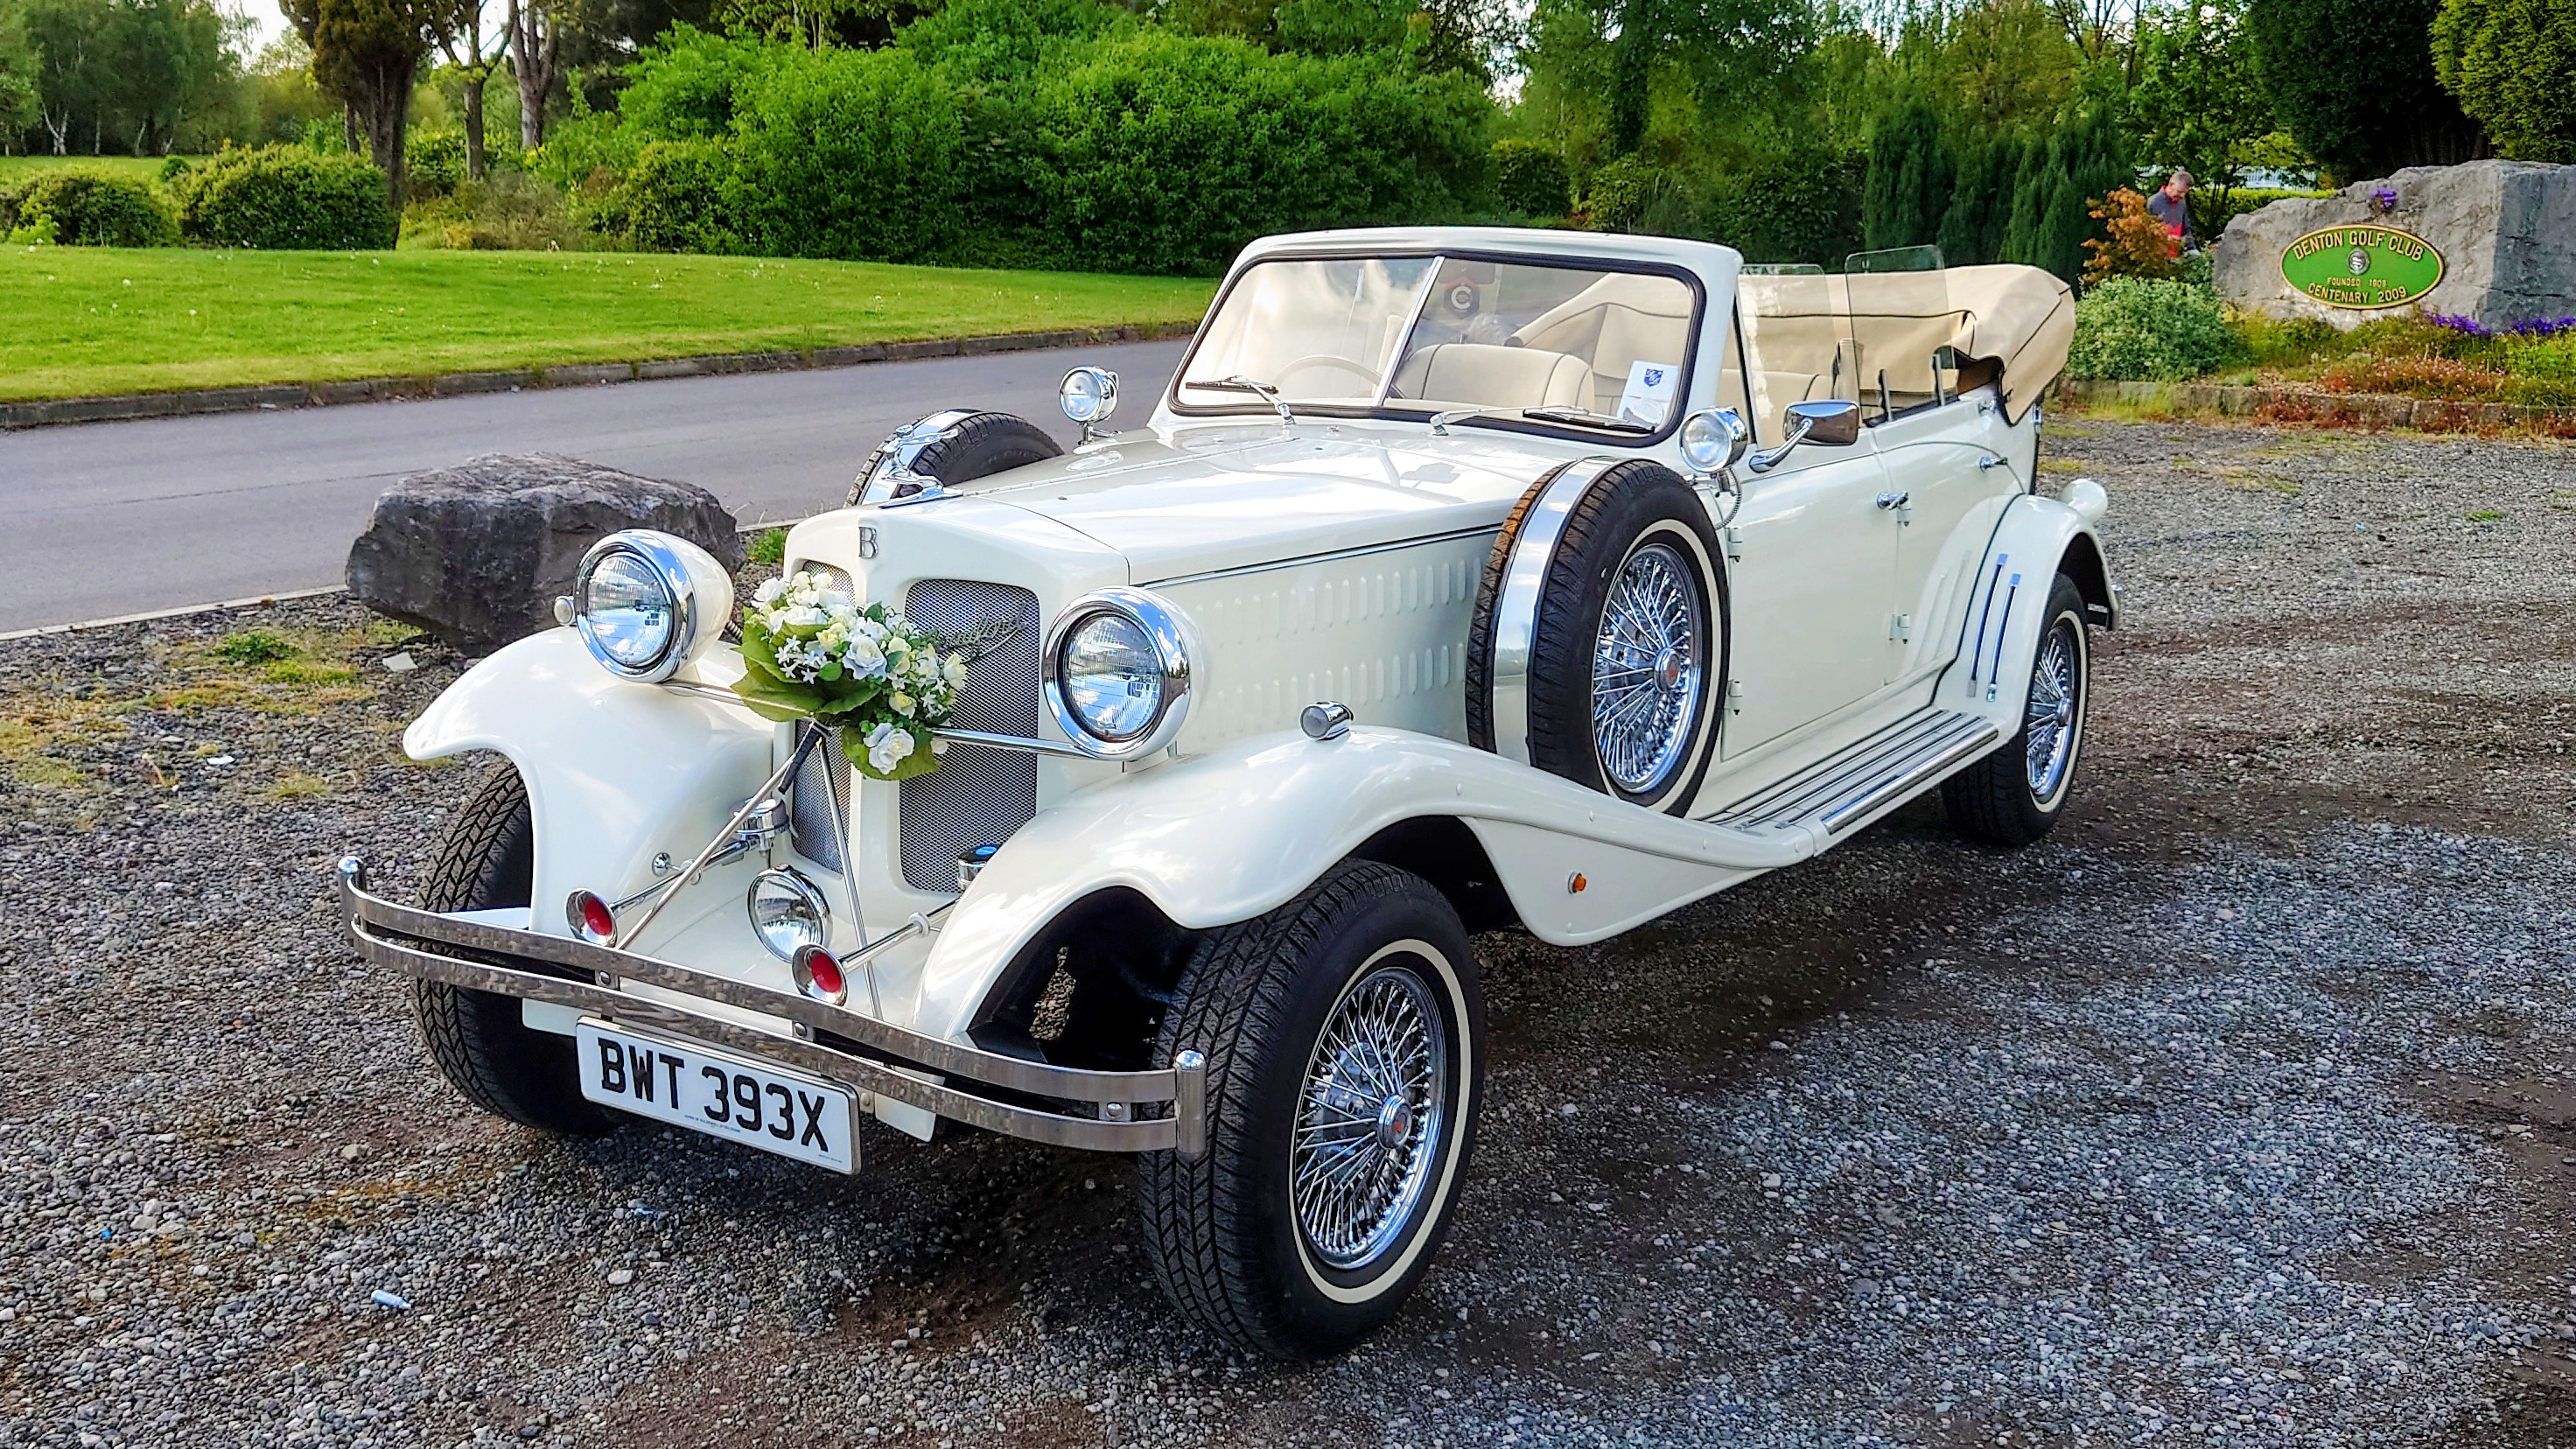 Ivory classic convertible Beauford with roof down dressed with wedding flower arrangment on its front grill. Vehicle is parked in the middle of a path in a Chester Park.